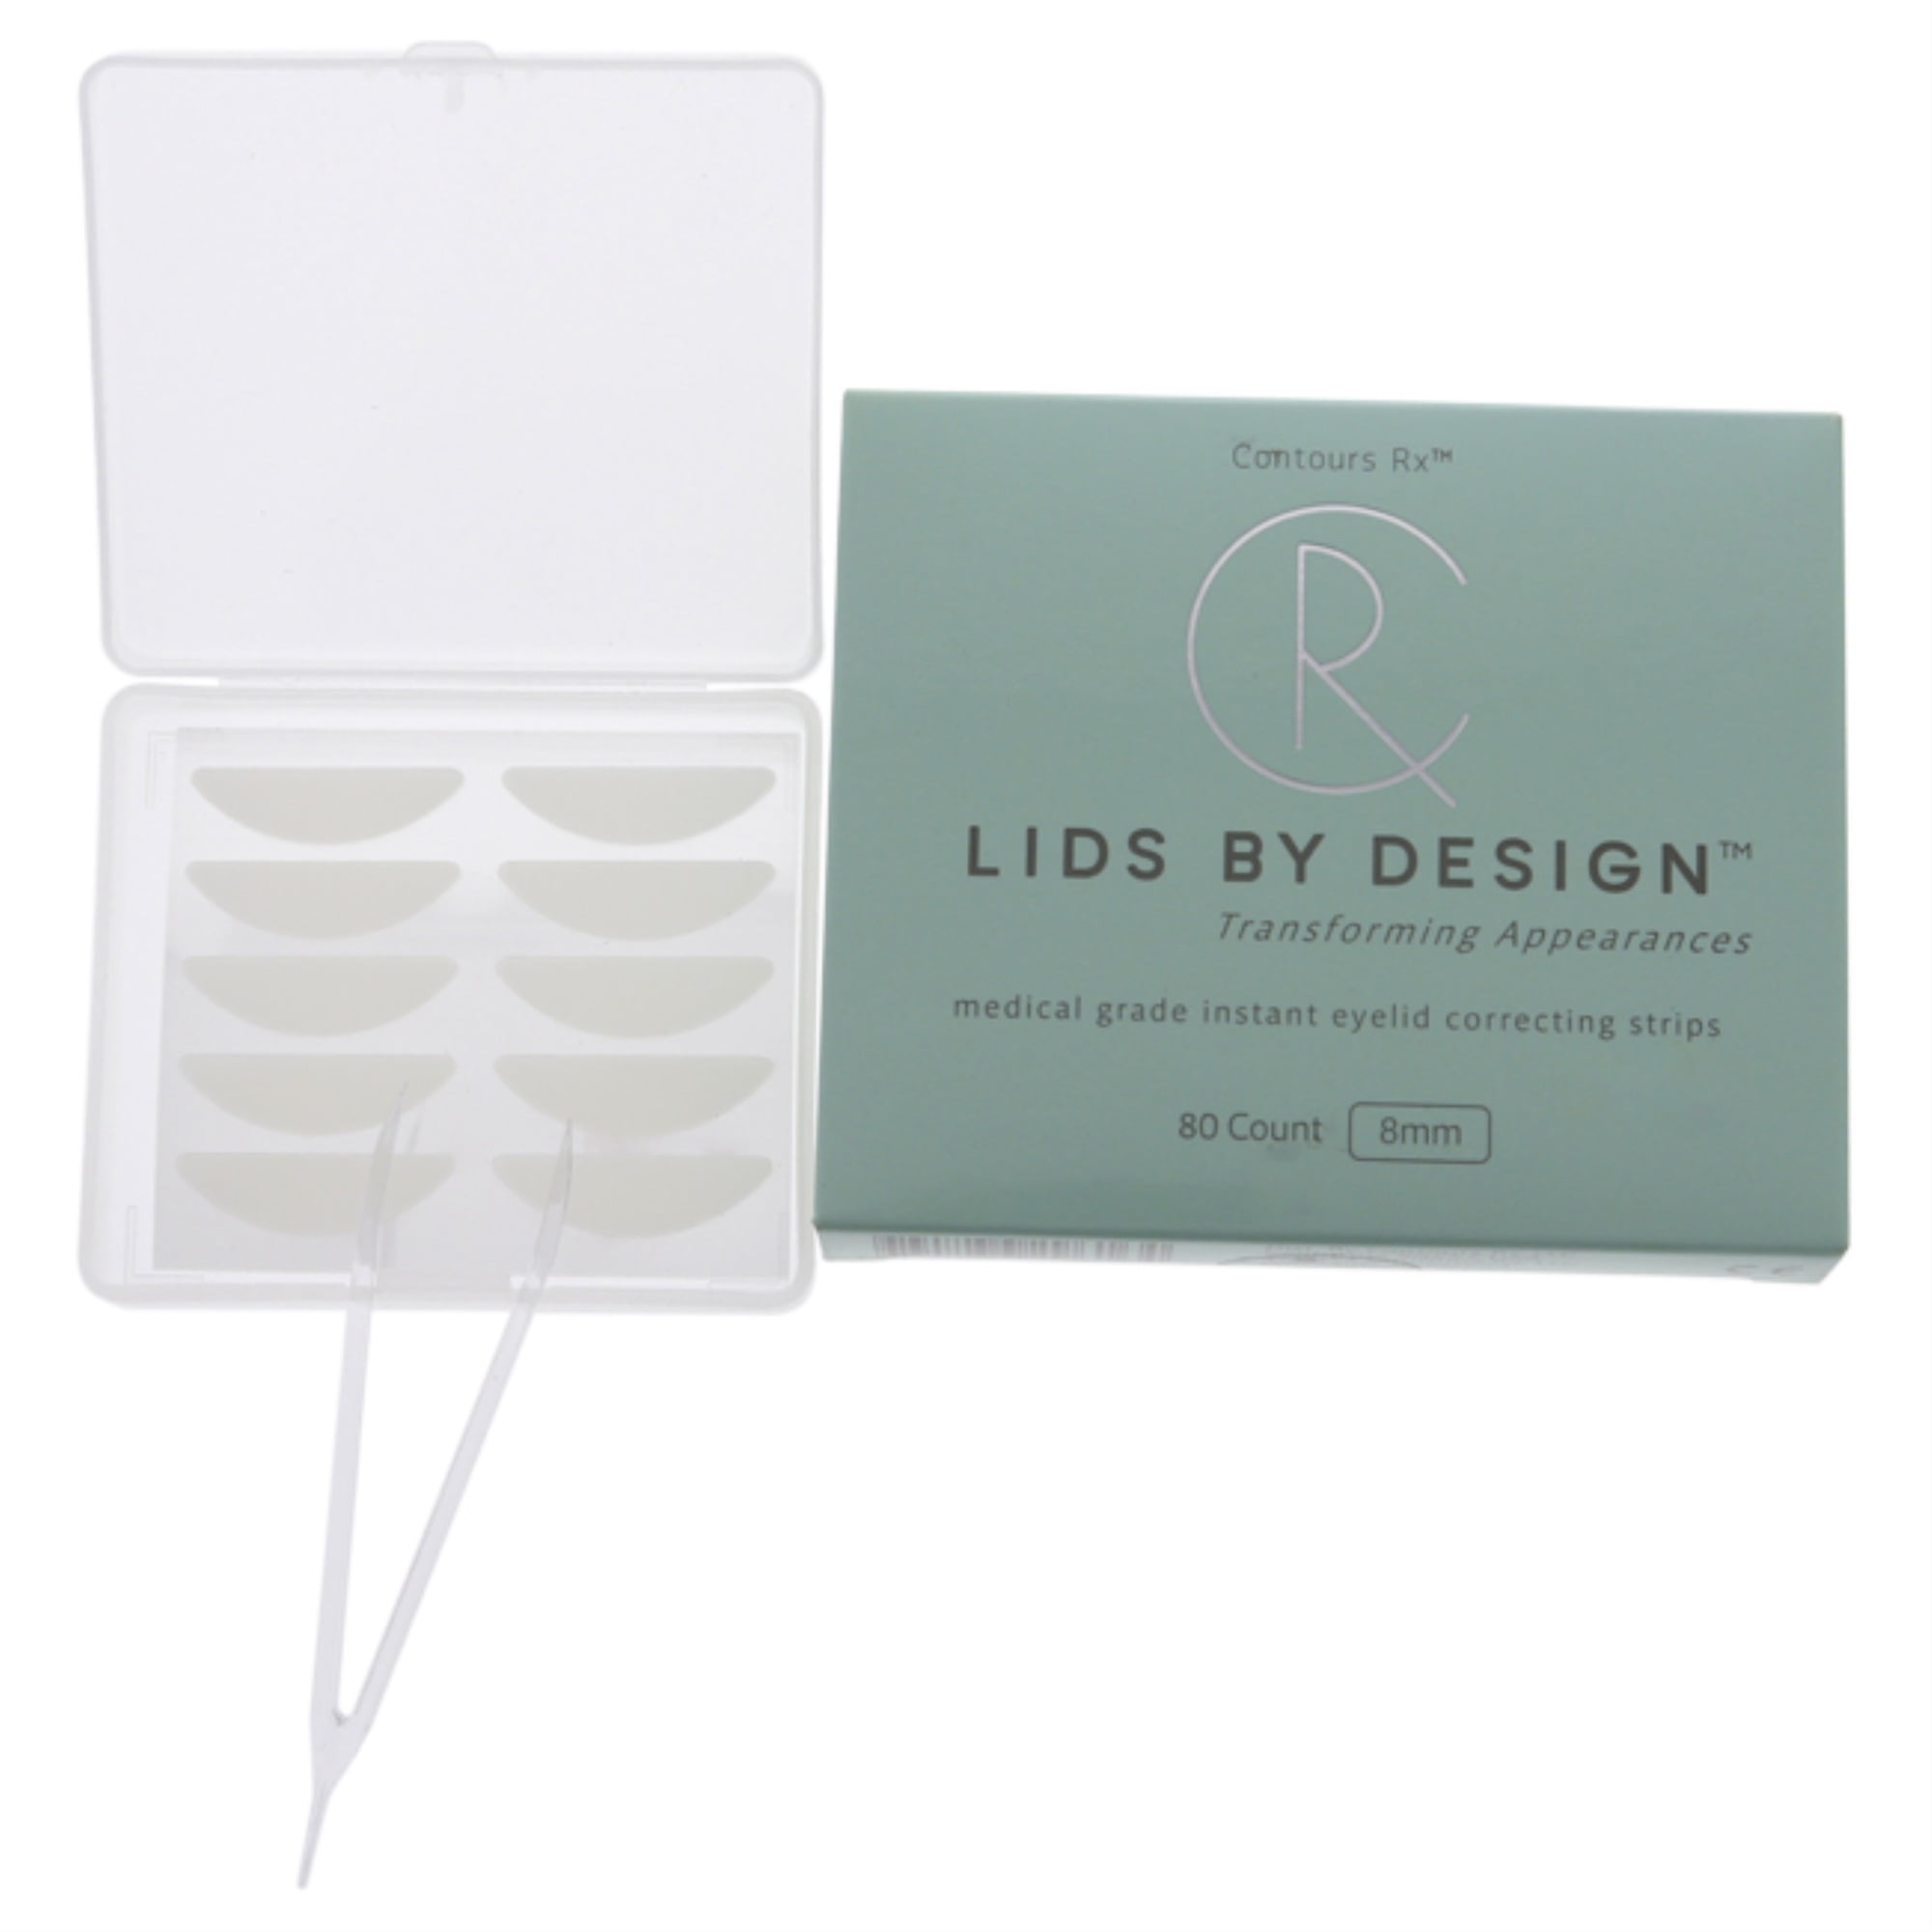 🆕 Lids By Design by Contours Rx 80 Ct Eyelid Strips Assortment 7mm 🆓  SHIPPING!